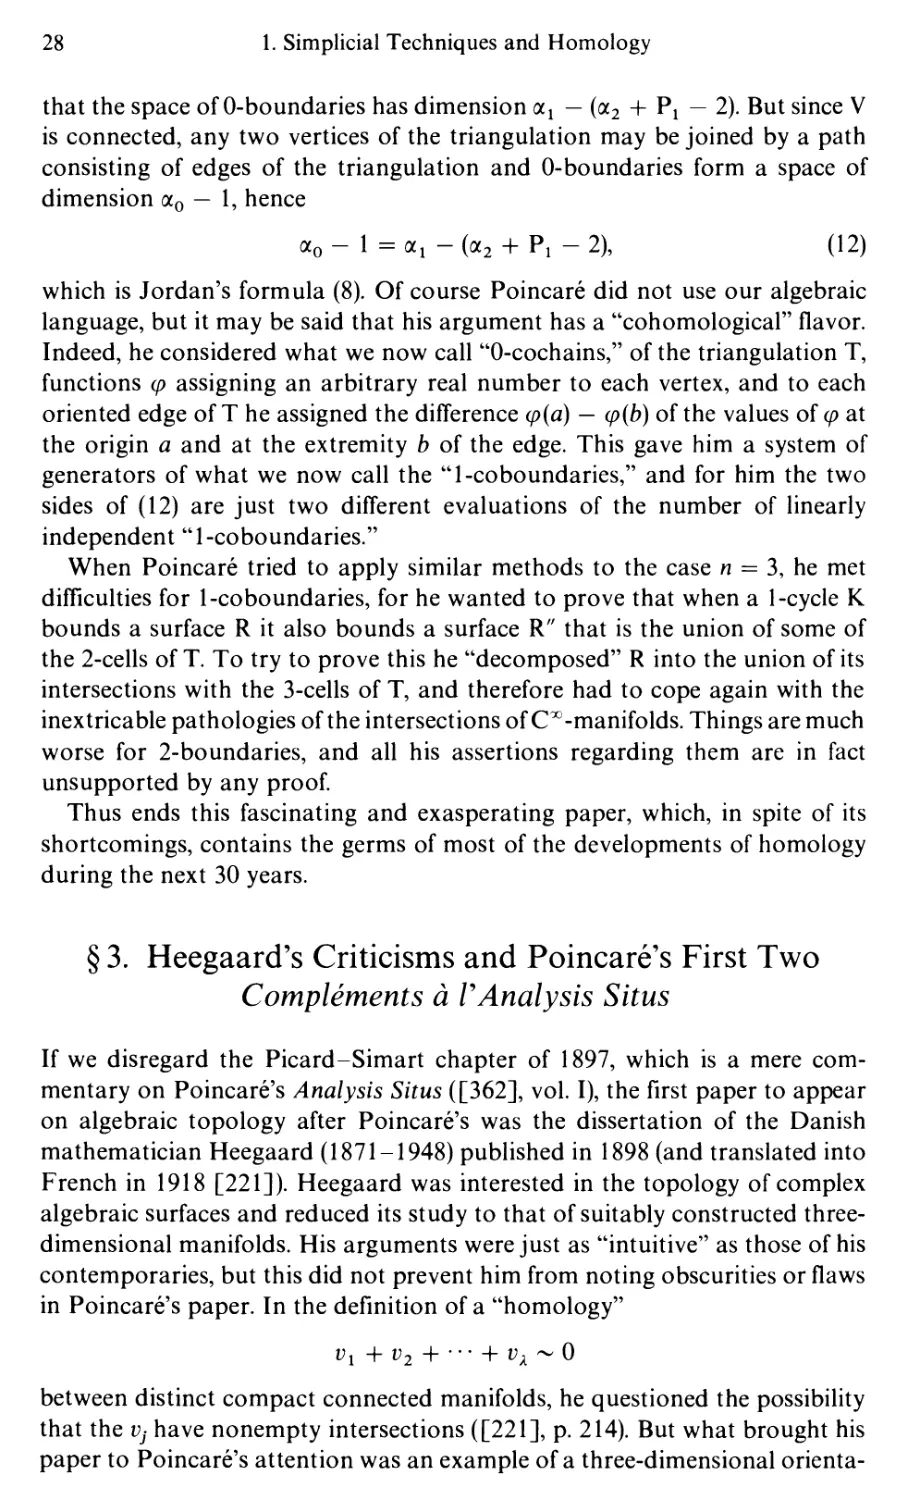 §3. Heegaard's Criticisms and the First Two Compléments à l'Analysis Situs